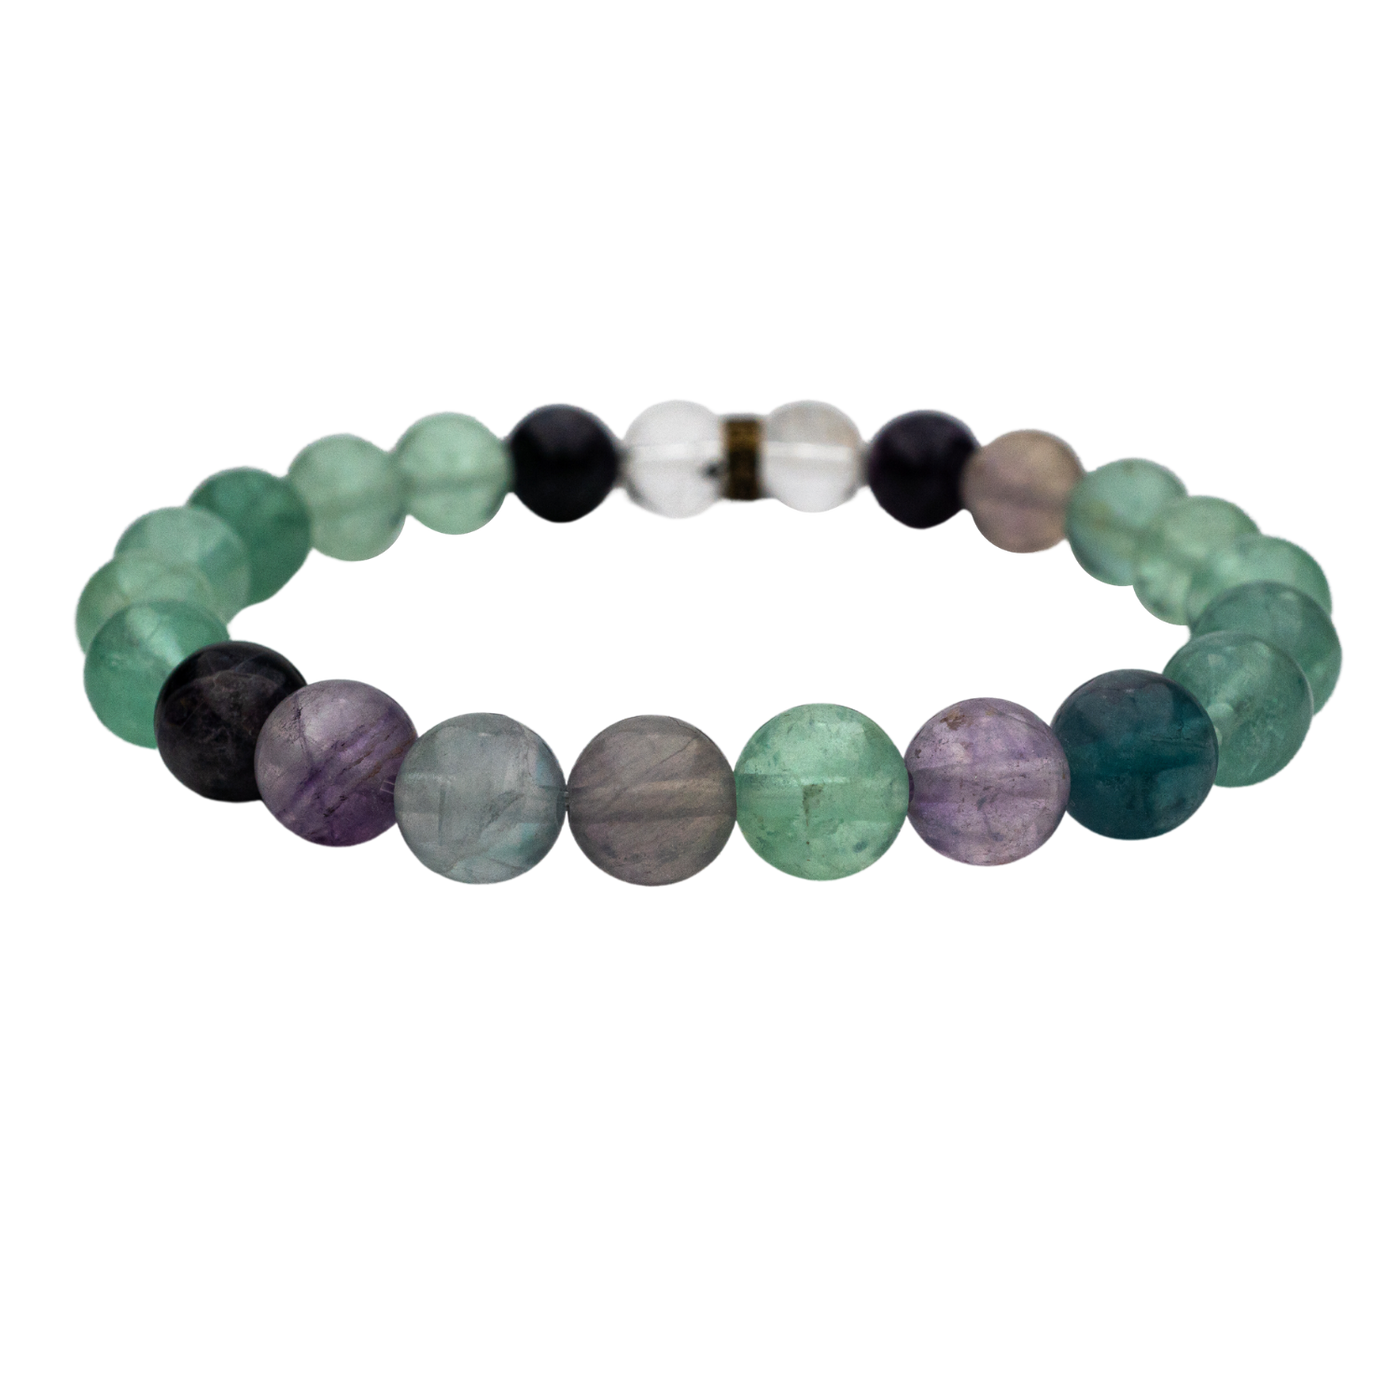 product view of genuine green and purple Fluorite stretch bracelet by Energy Muse